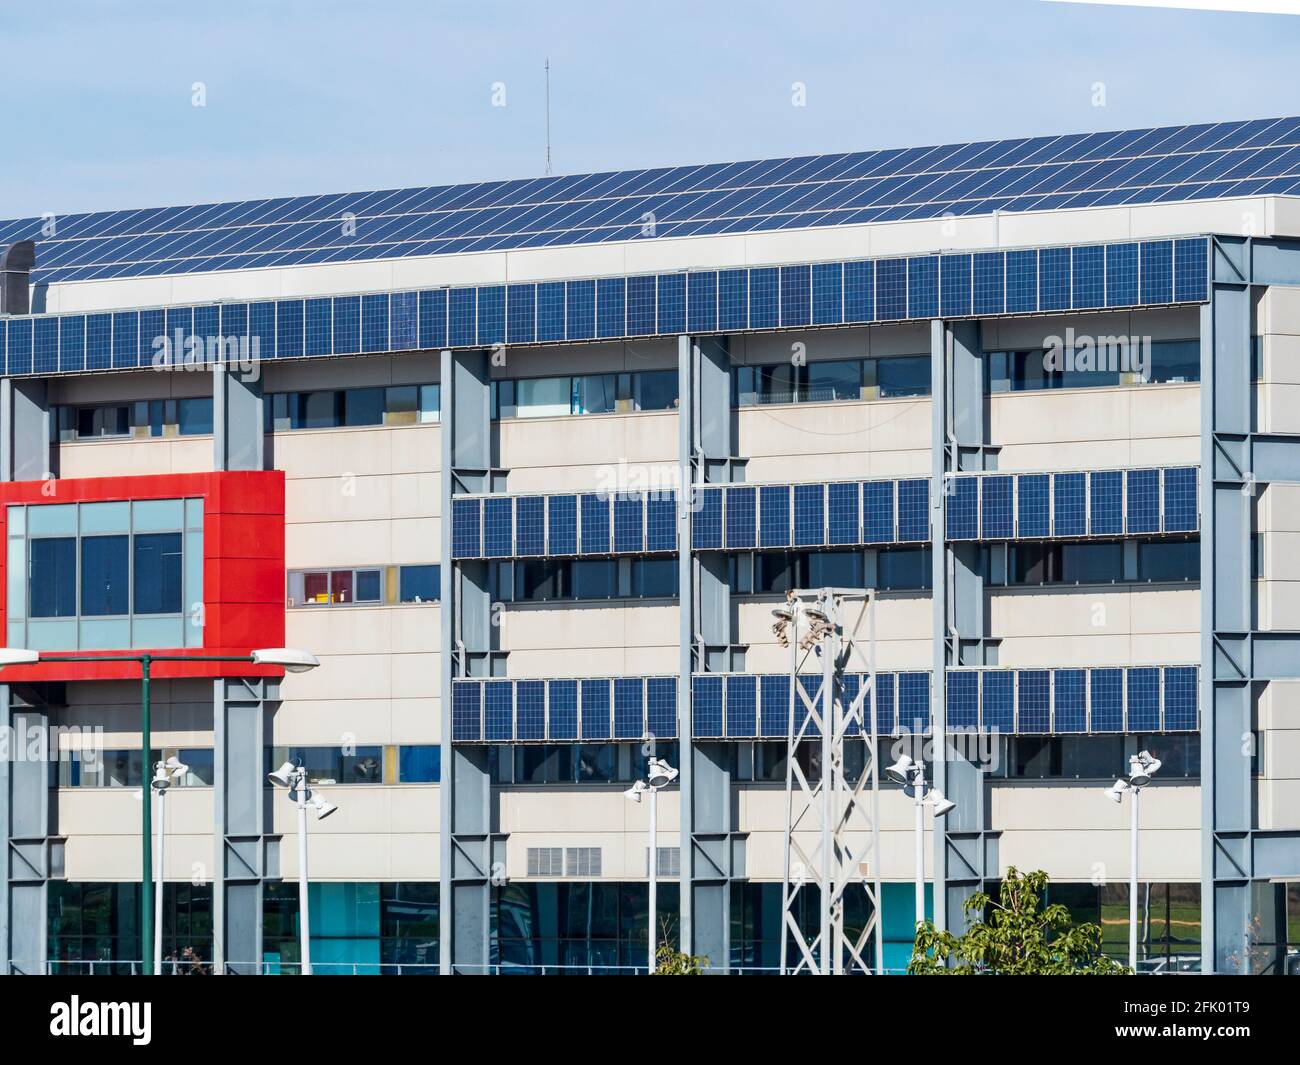 Façade of building with solar panels for electricity production Stock Photo